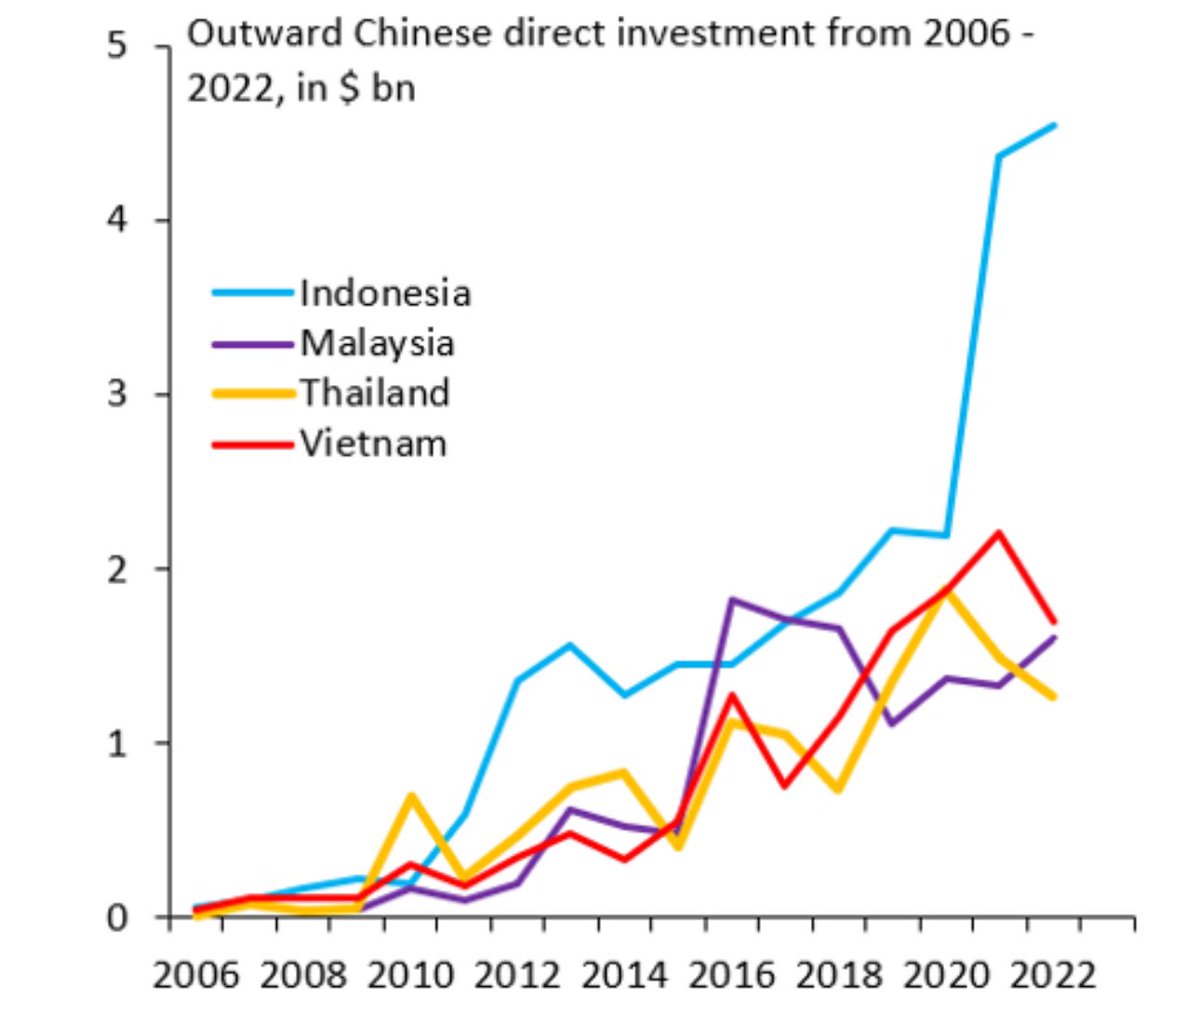 Chinese investment is pouring into Southeast Asia as the region is poised to gain from US-China decoupling efforts and Chinese firms trying to diversify their production. If there isn’t an economic miracle in Southeast Asia over the next decade, that would be a huge miss.